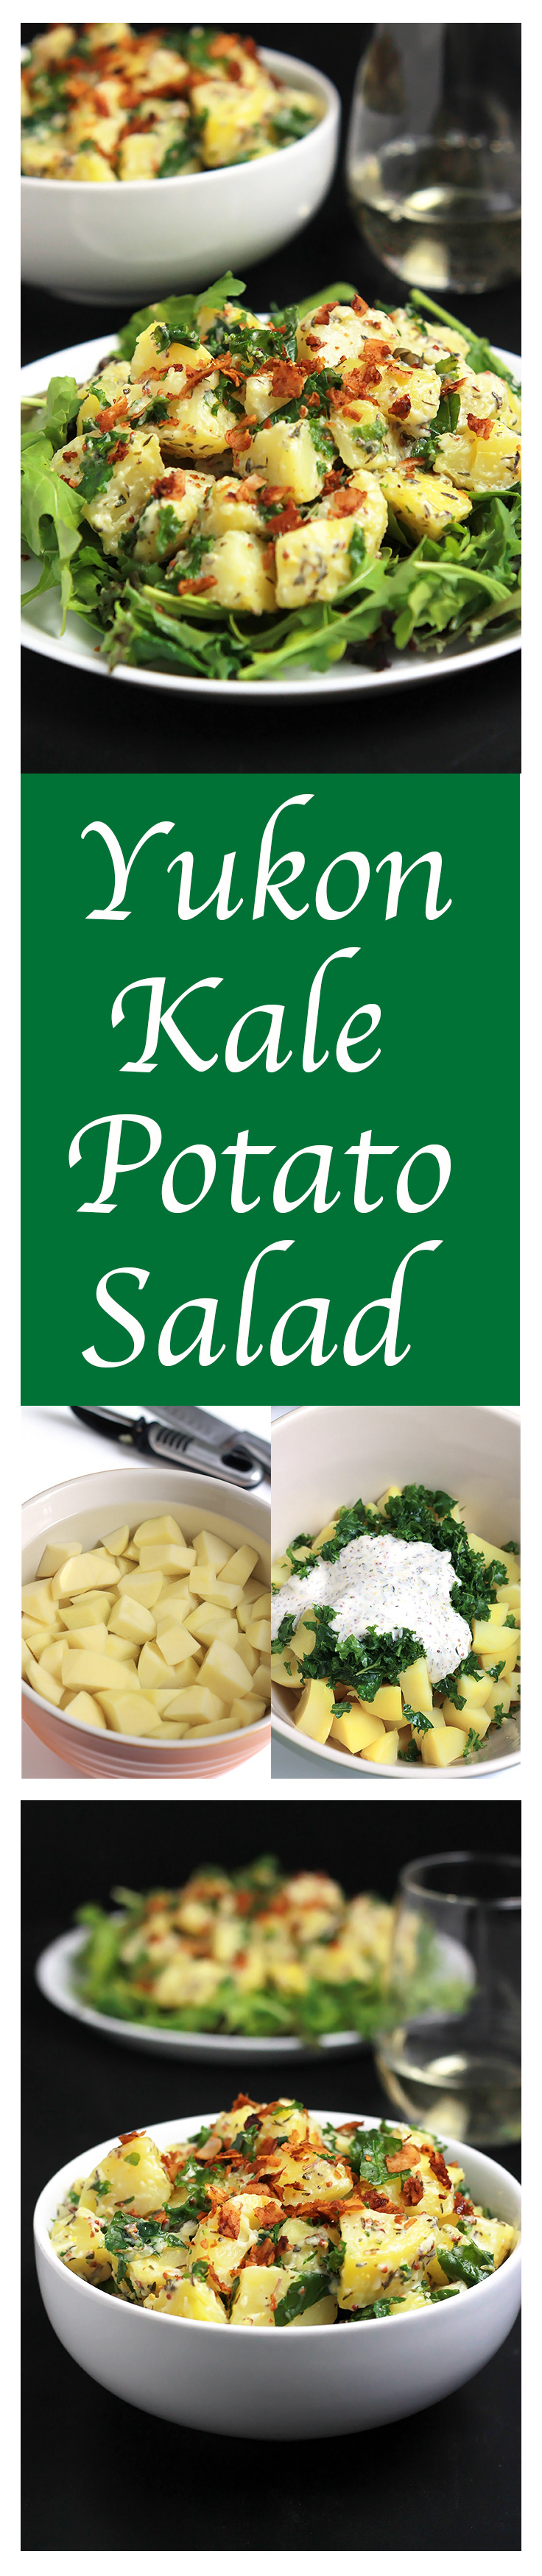 Yukon Kale Potato Salad-Sweet golden potatoes and chopped kale tossed together in a creamy dressing, garnished with a sprinkling of coconut bacon. A delicious twist to a traditional summer side for the vegetarians or vegans in the crowd.